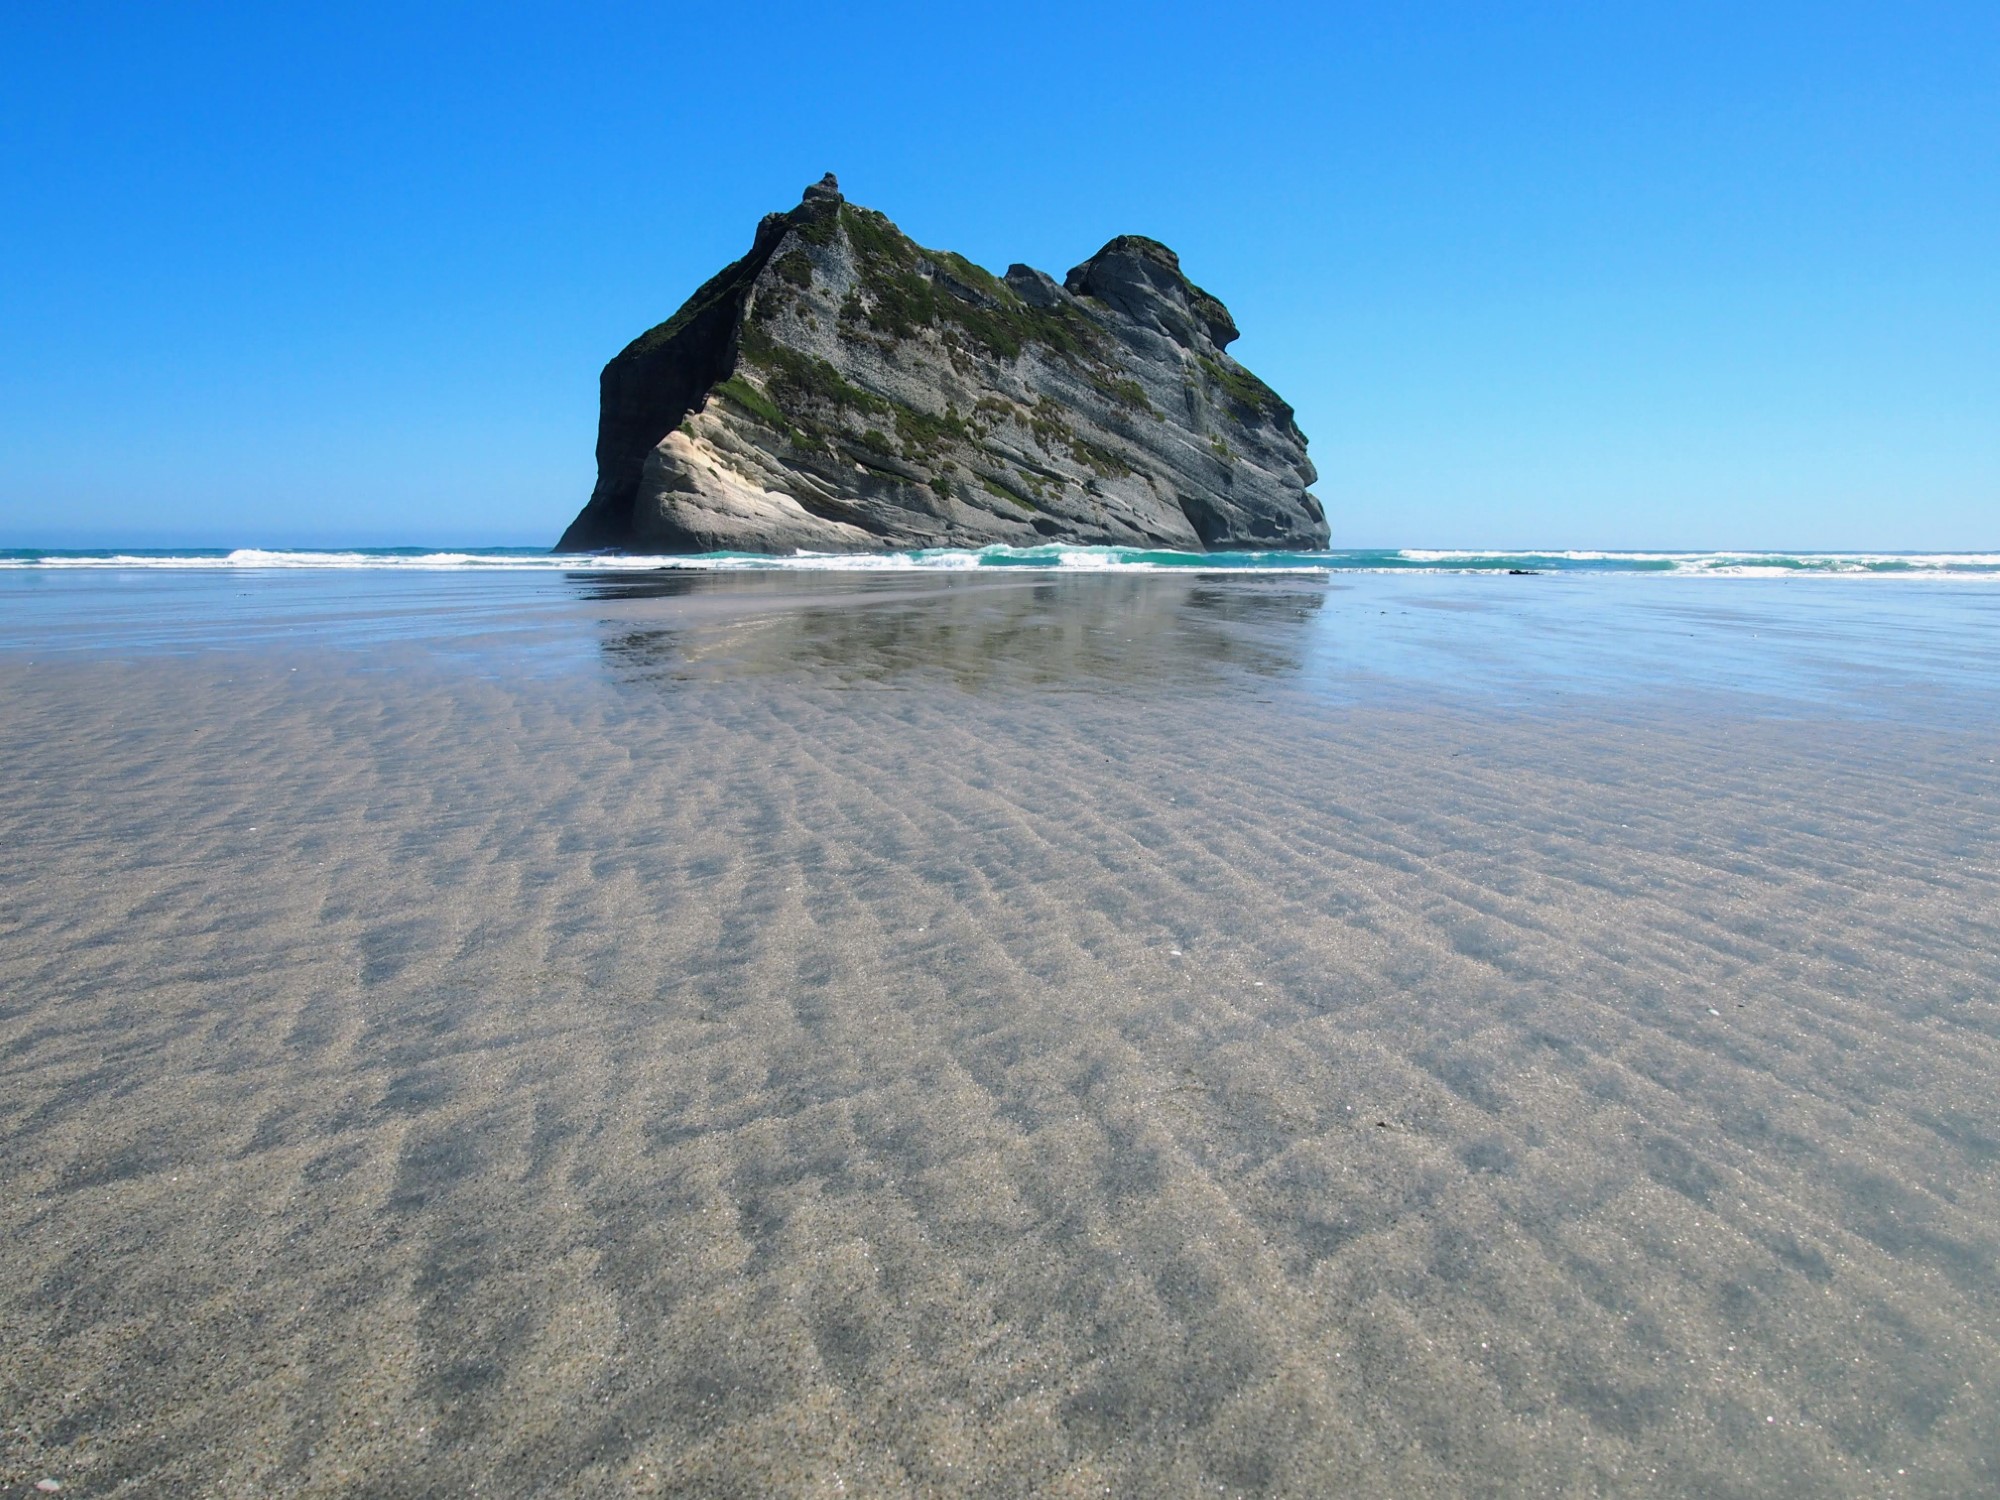 Rock and reflections in the sand at low tide at Wharariki beach, Golden Bay, New Zealand